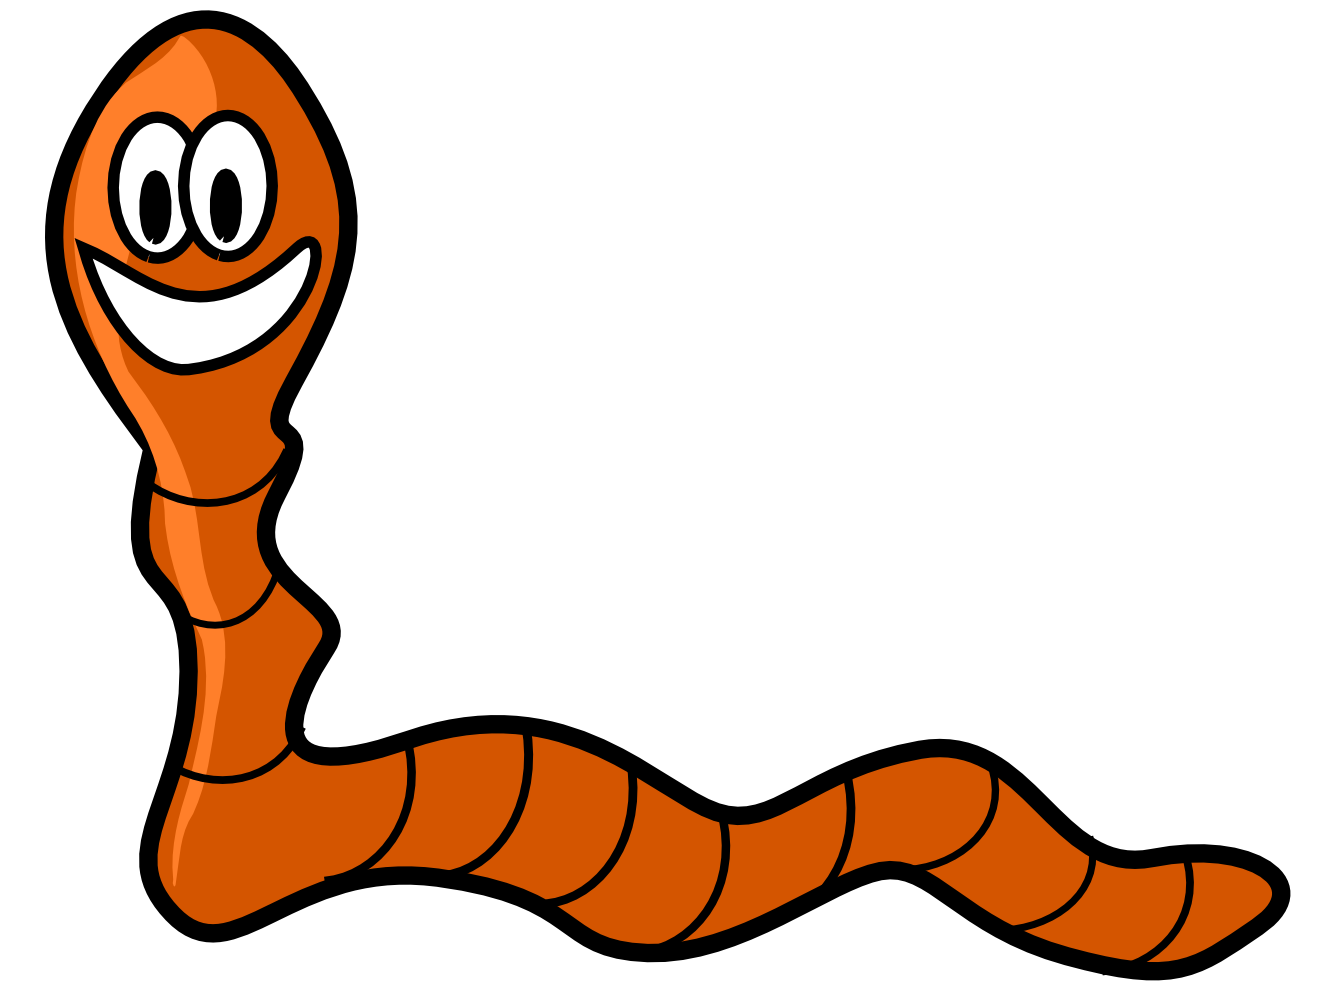  collection of high. Worm clipart soil organism